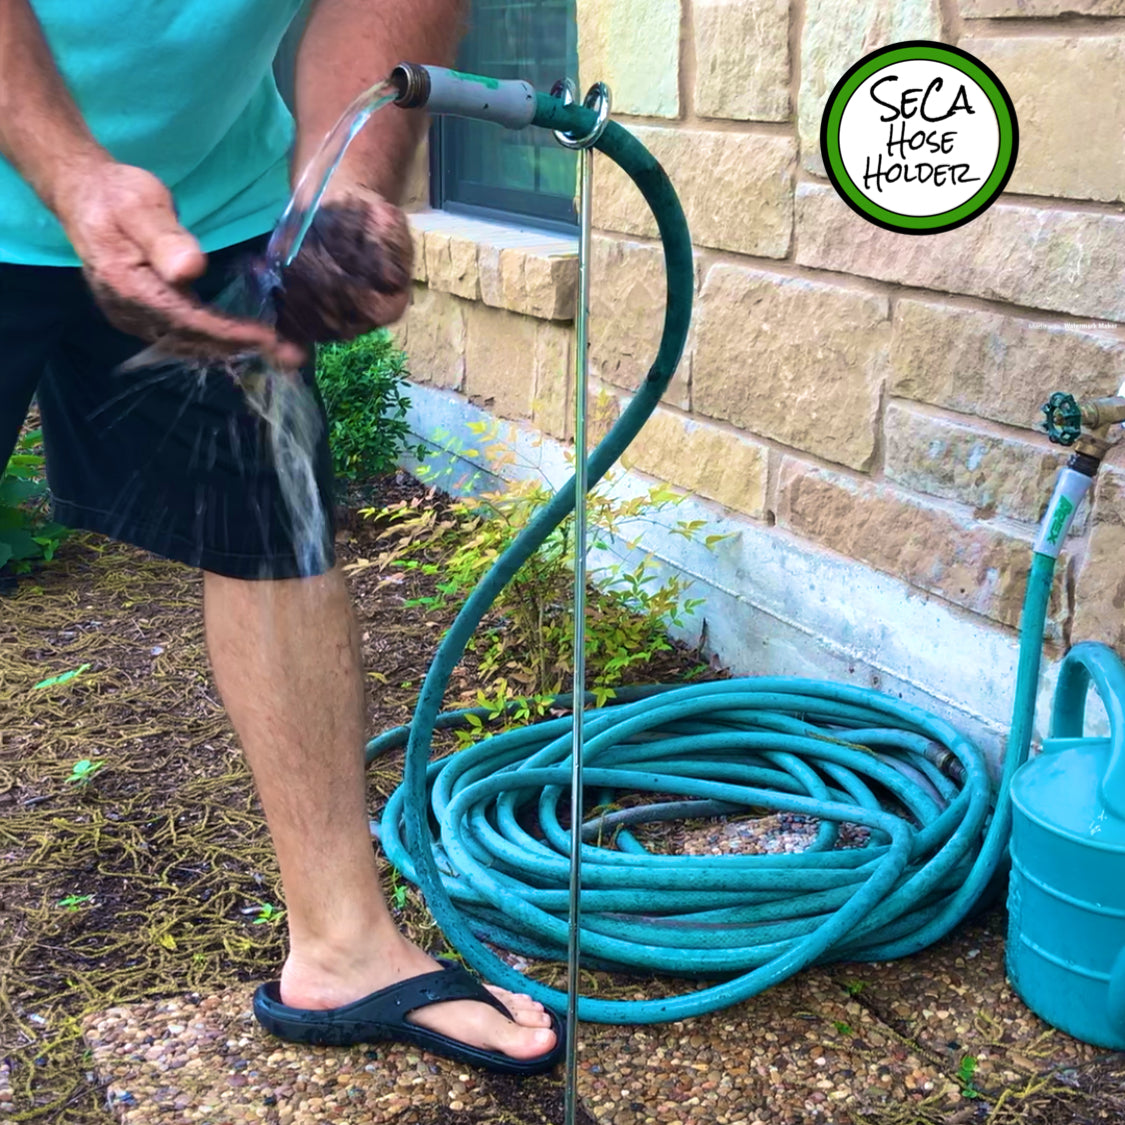 1 Seca Hose Holder The Best Home Garden Tool For The Water Hose